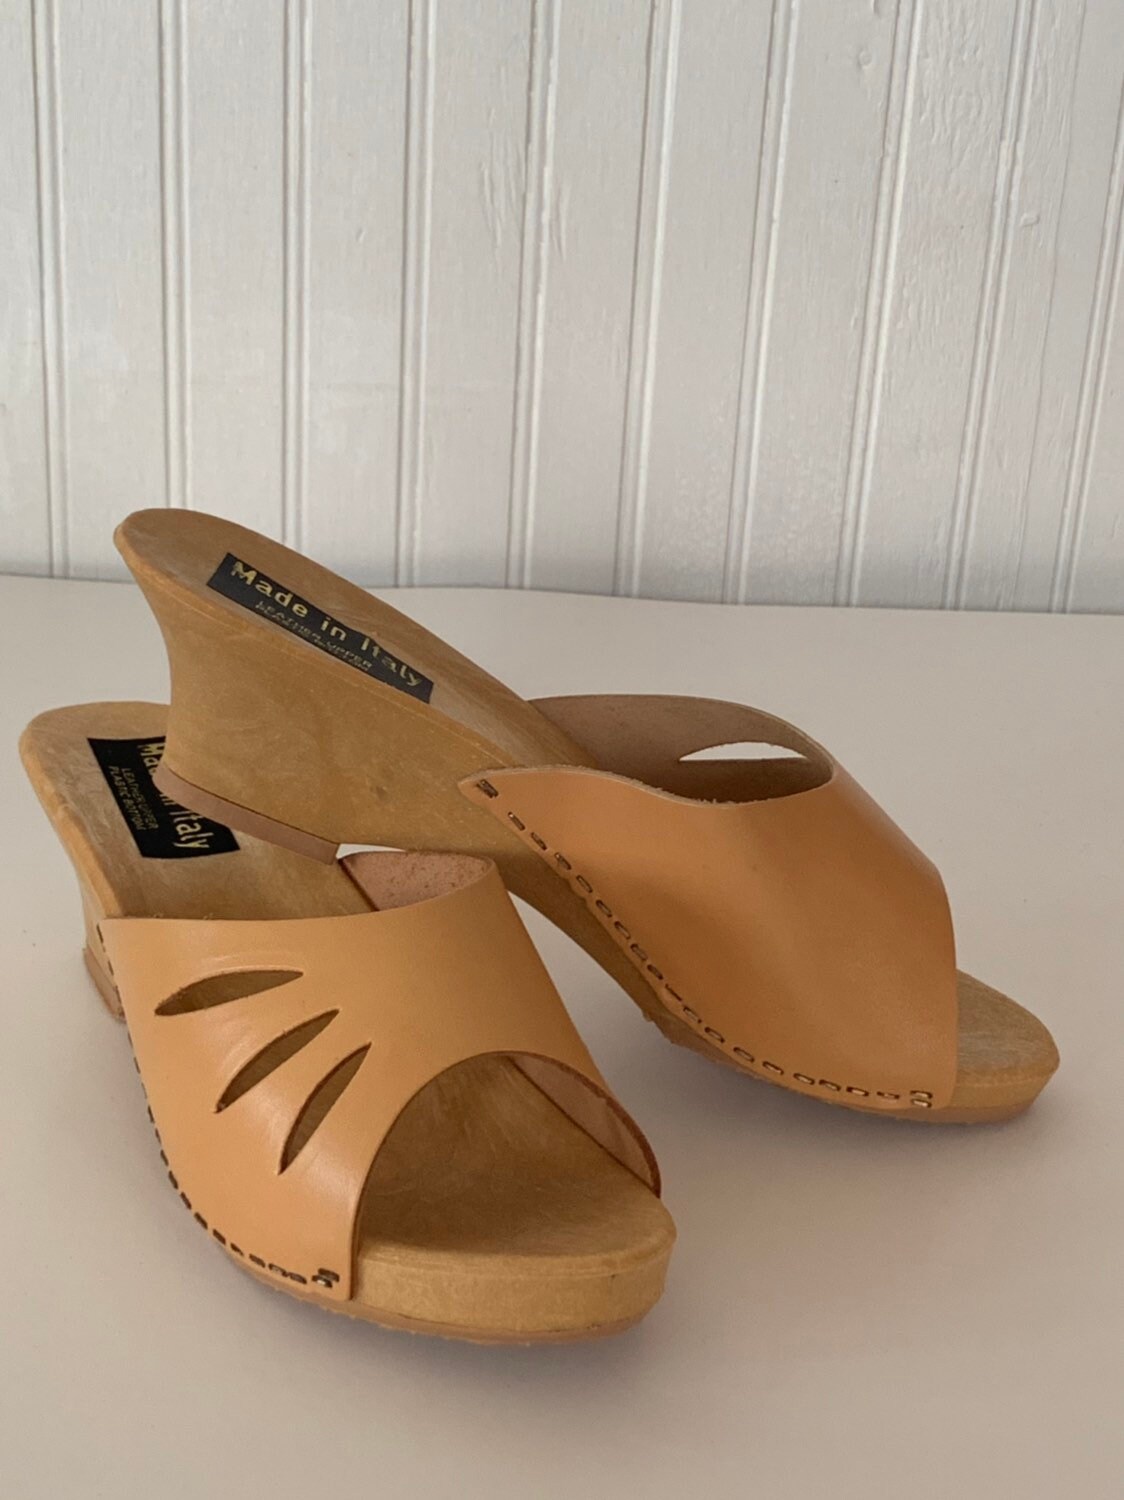 Vintage 70s Deadstock Size 8 Leather Sandals Made in Italy Nude Tan ...